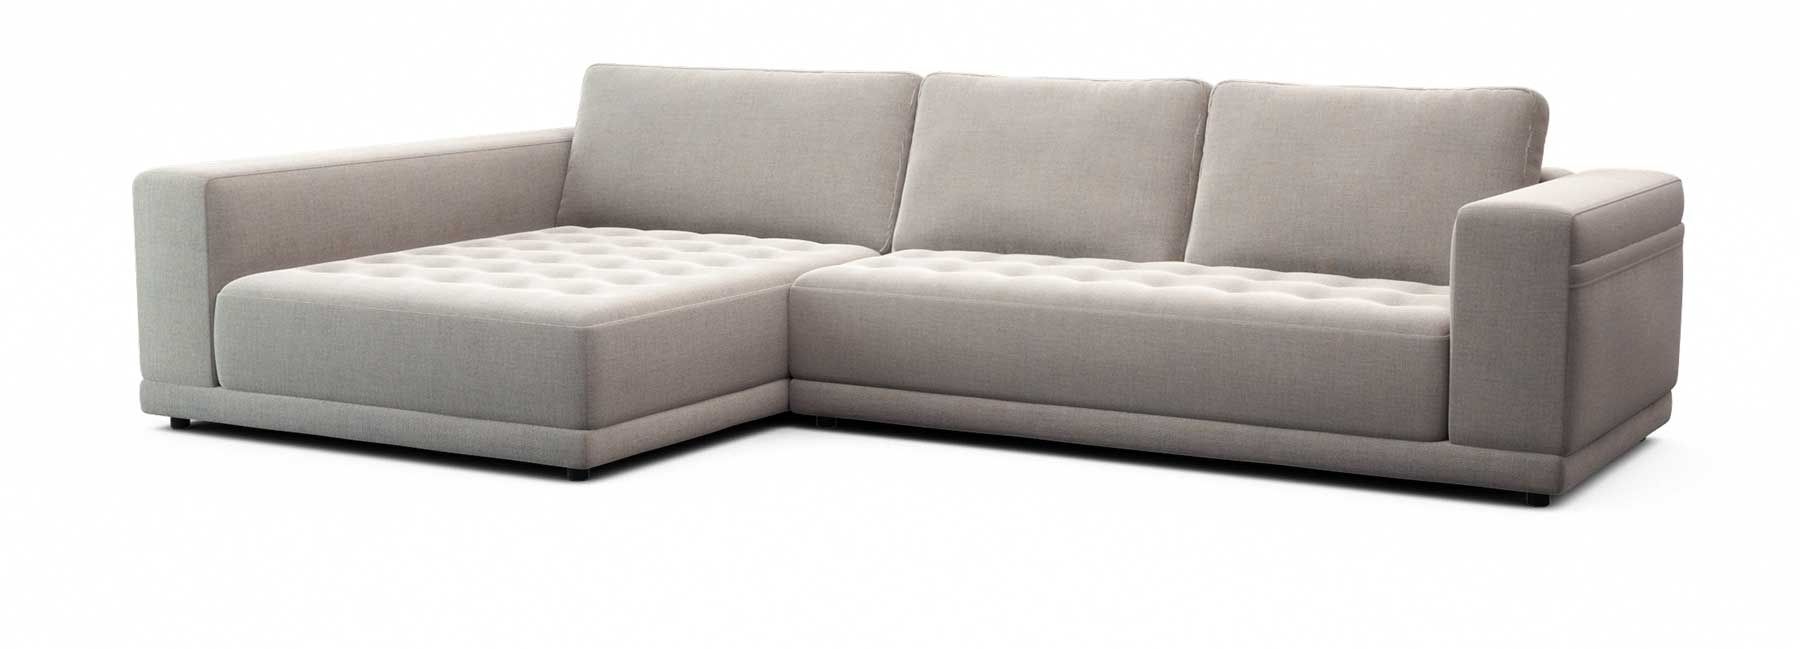 Felix Modular Sofa – Deep Seat Comfort | Tufted Seat | Lounge In Norfolk Grey 6 Piece Sectionals (View 20 of 30)